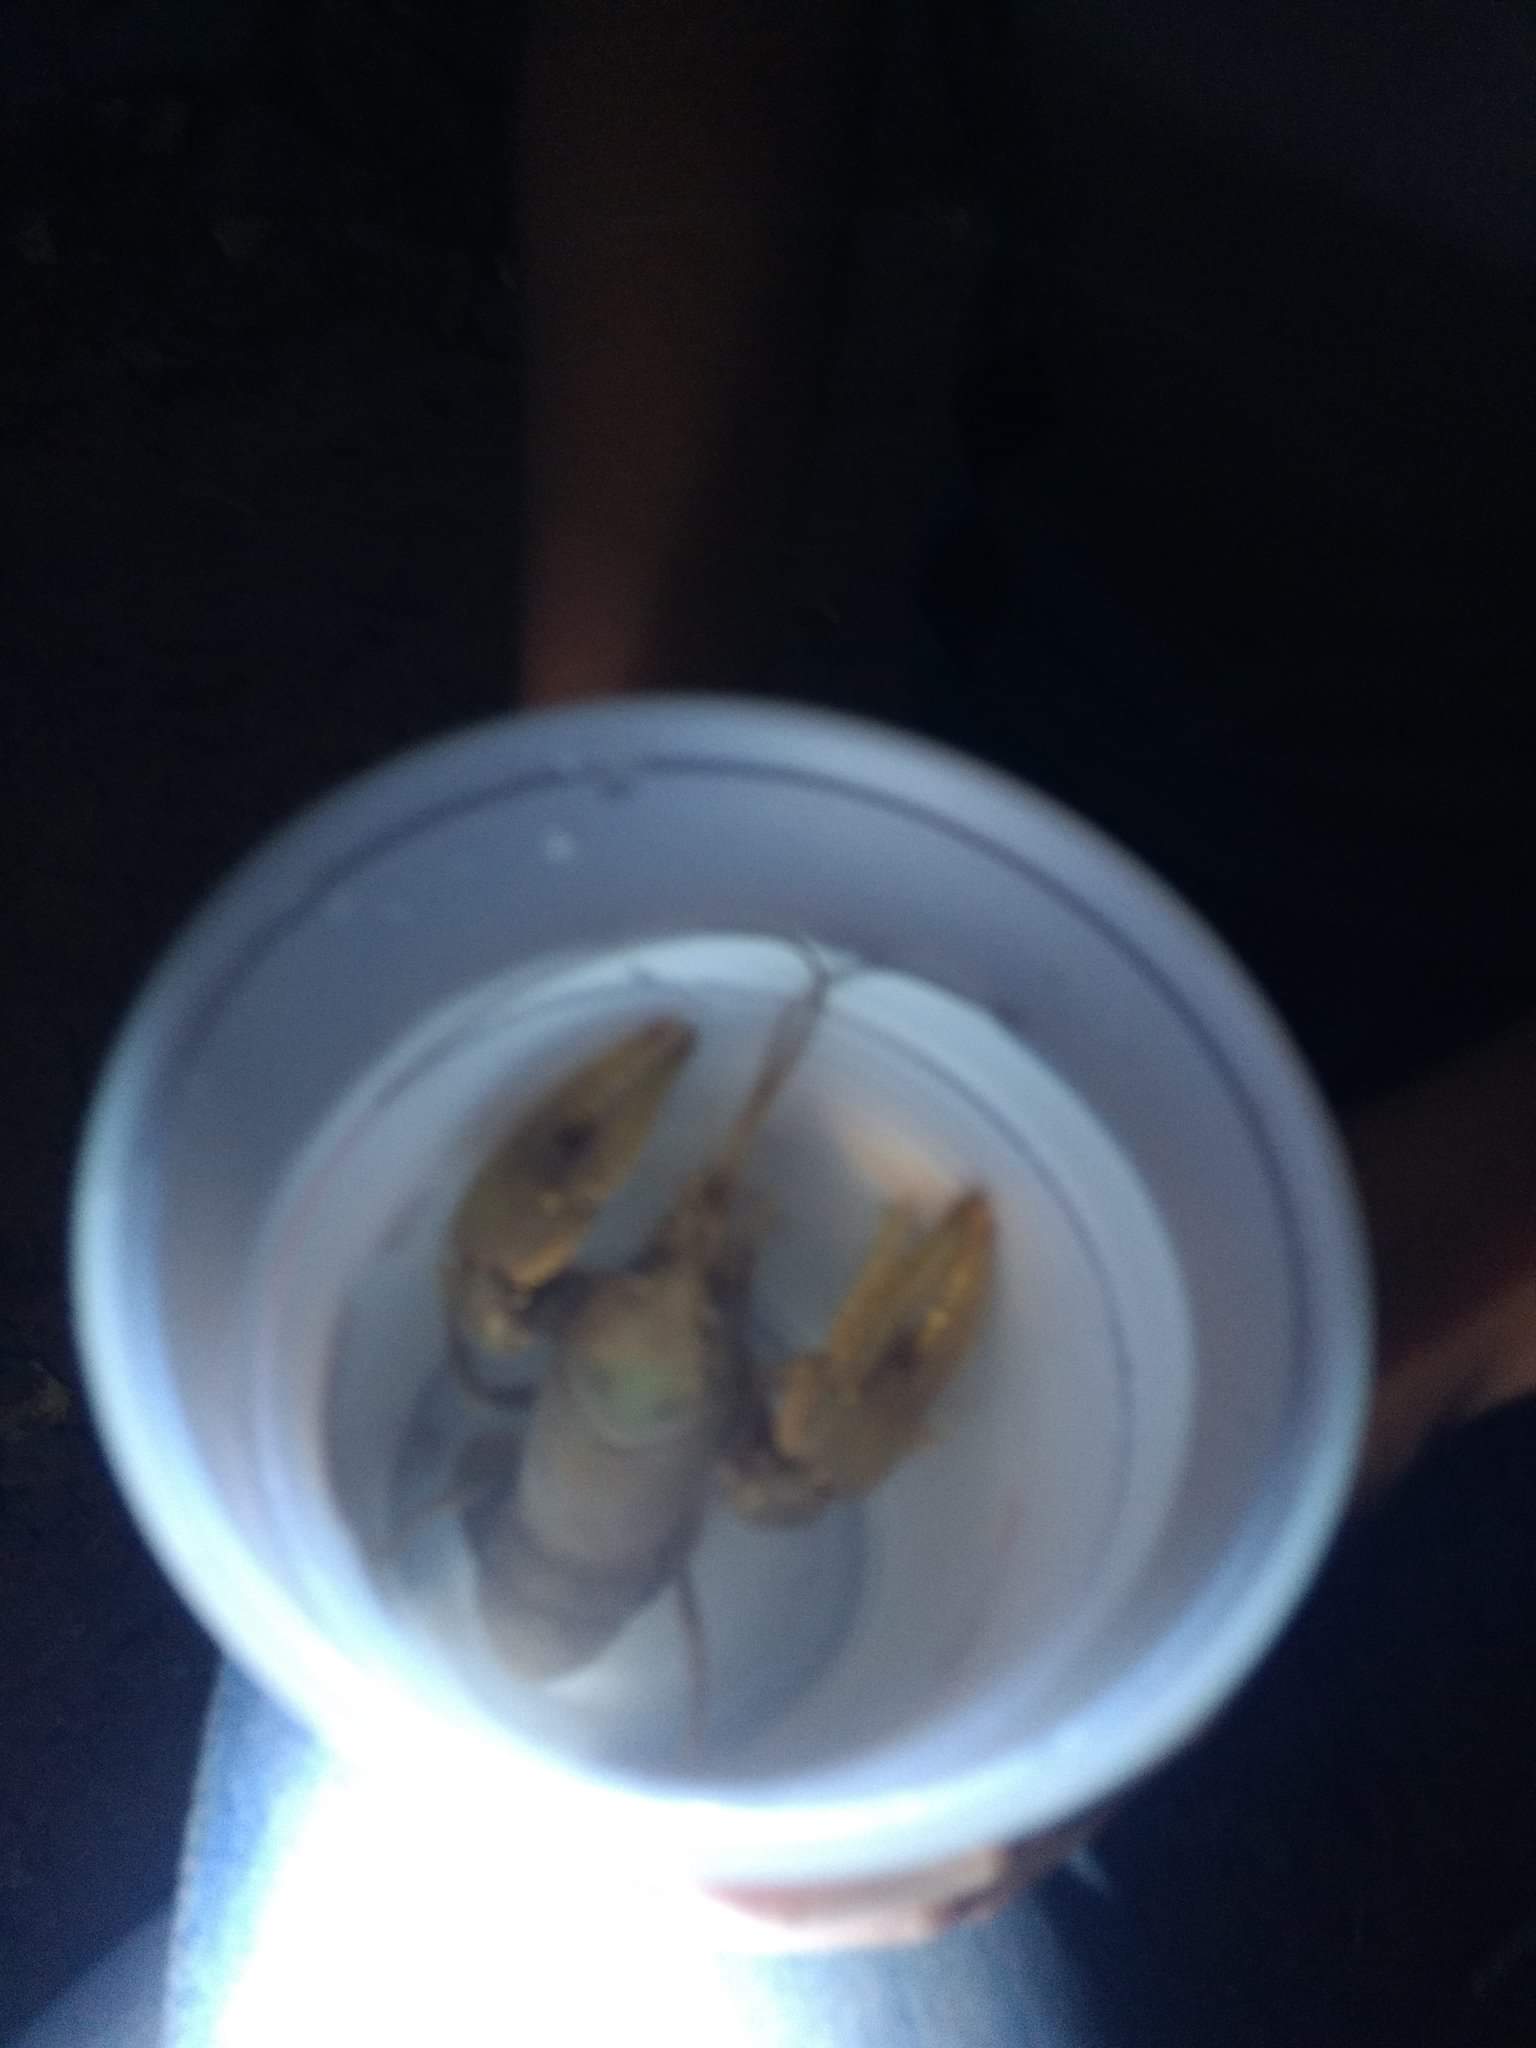 Crawdad catch and release